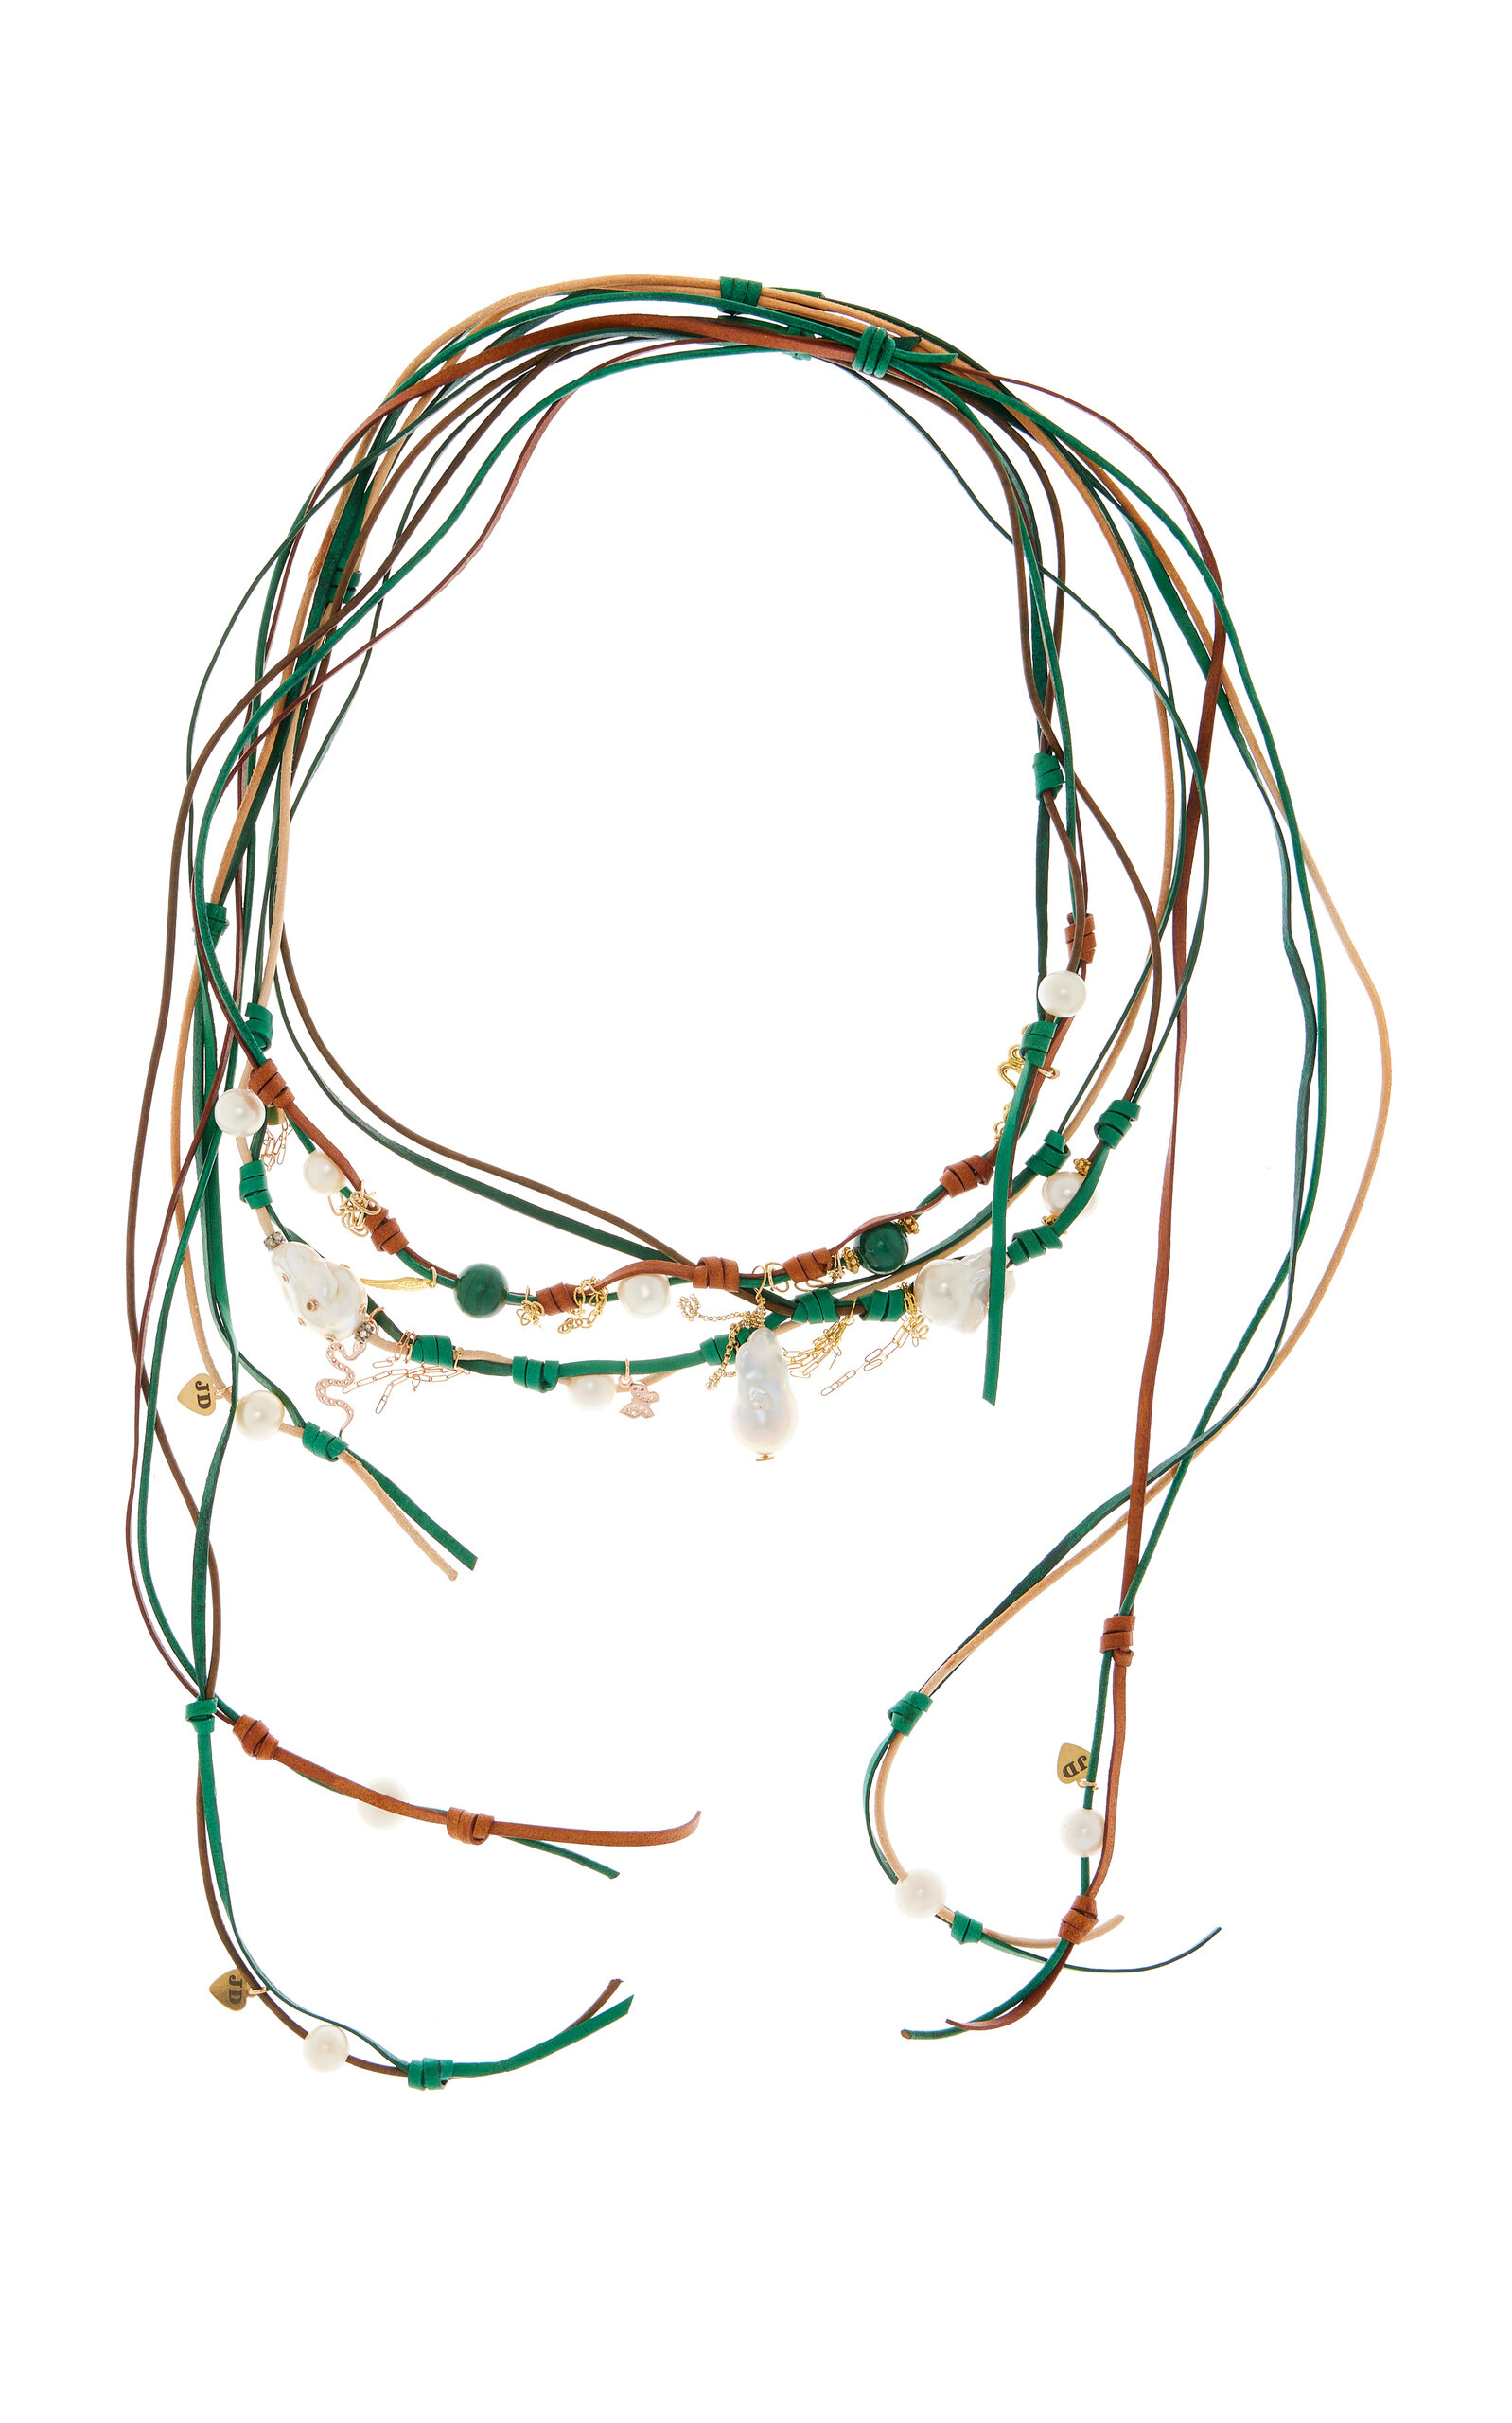 Shop Joie Digiovanni Goddess Deluxe Rockstar Leather Necklace Set In Green